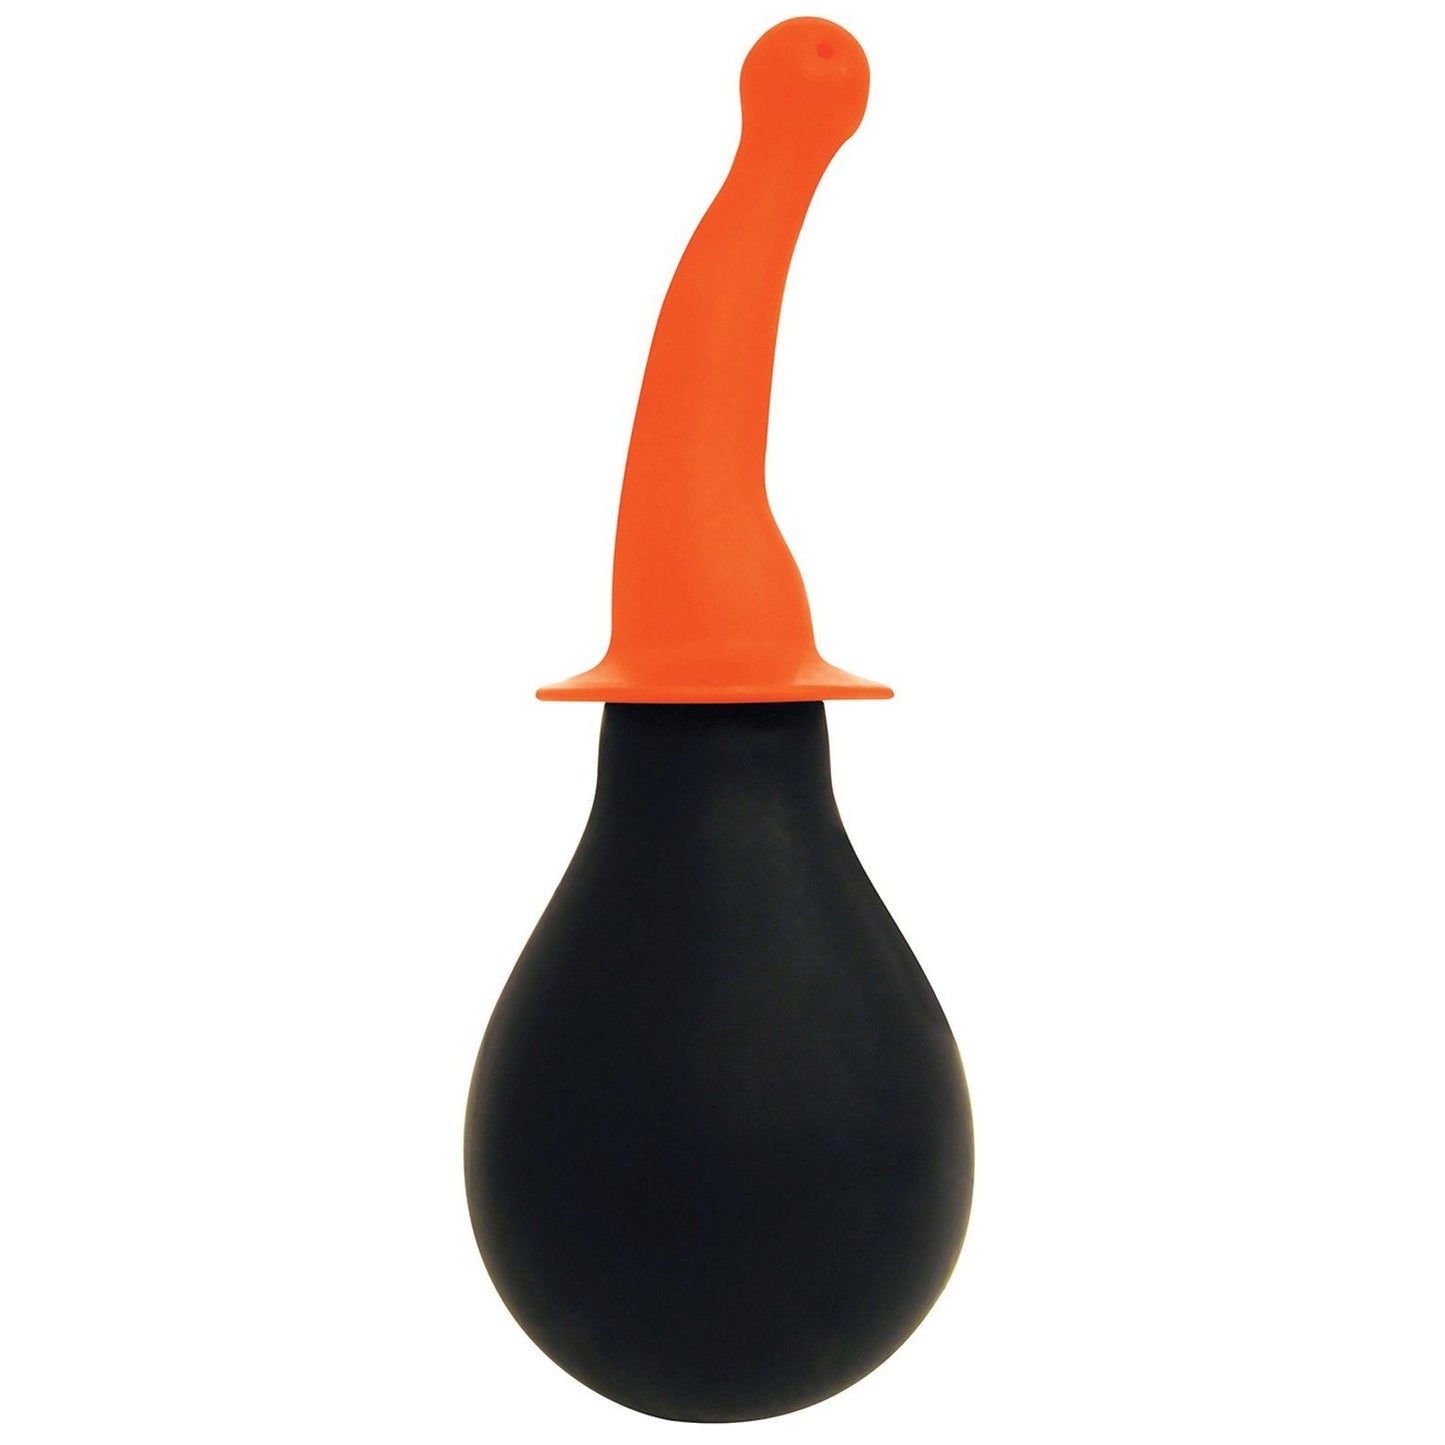 Curve Novelties Rooster Tail Cleaner - 100% Silicone